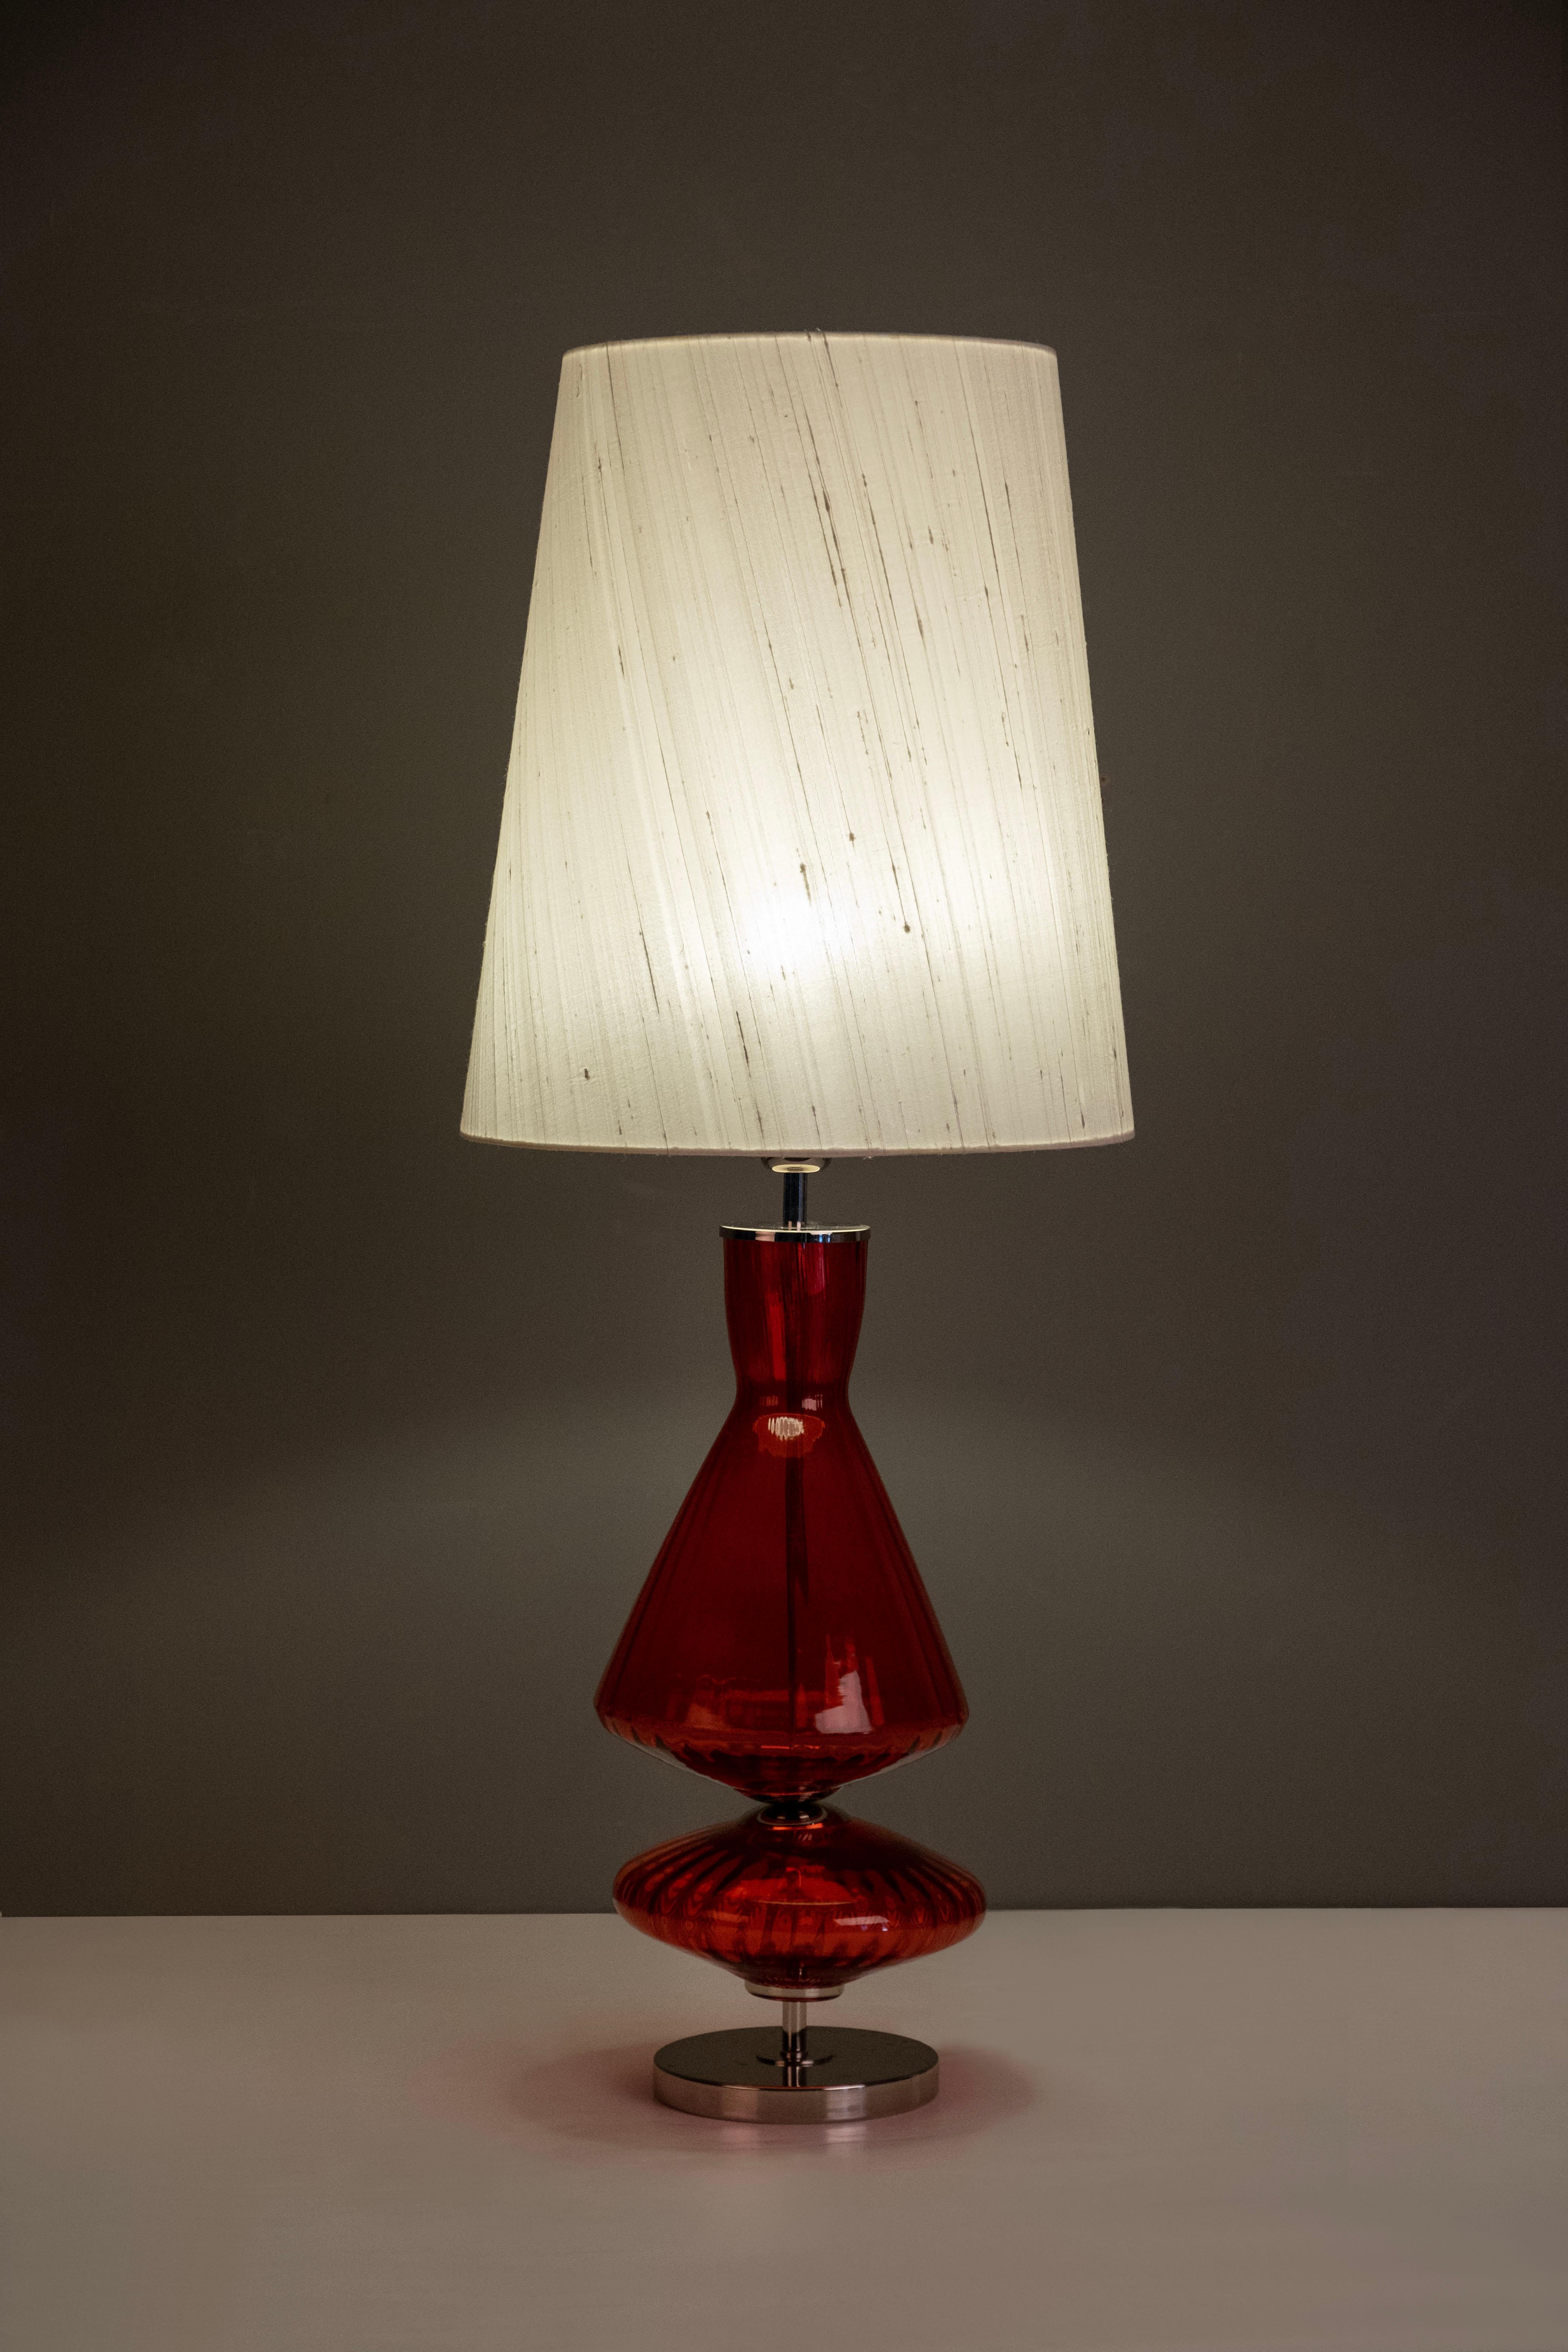 Set of 2 Assis table lamps, Modern Collection, handcrafted in Portugal - Europe by GF Modern.

Assis is an elegant table lamp and an attractive addition to a modern home. The Red glass and polished stainless steel gracefully combine with the white